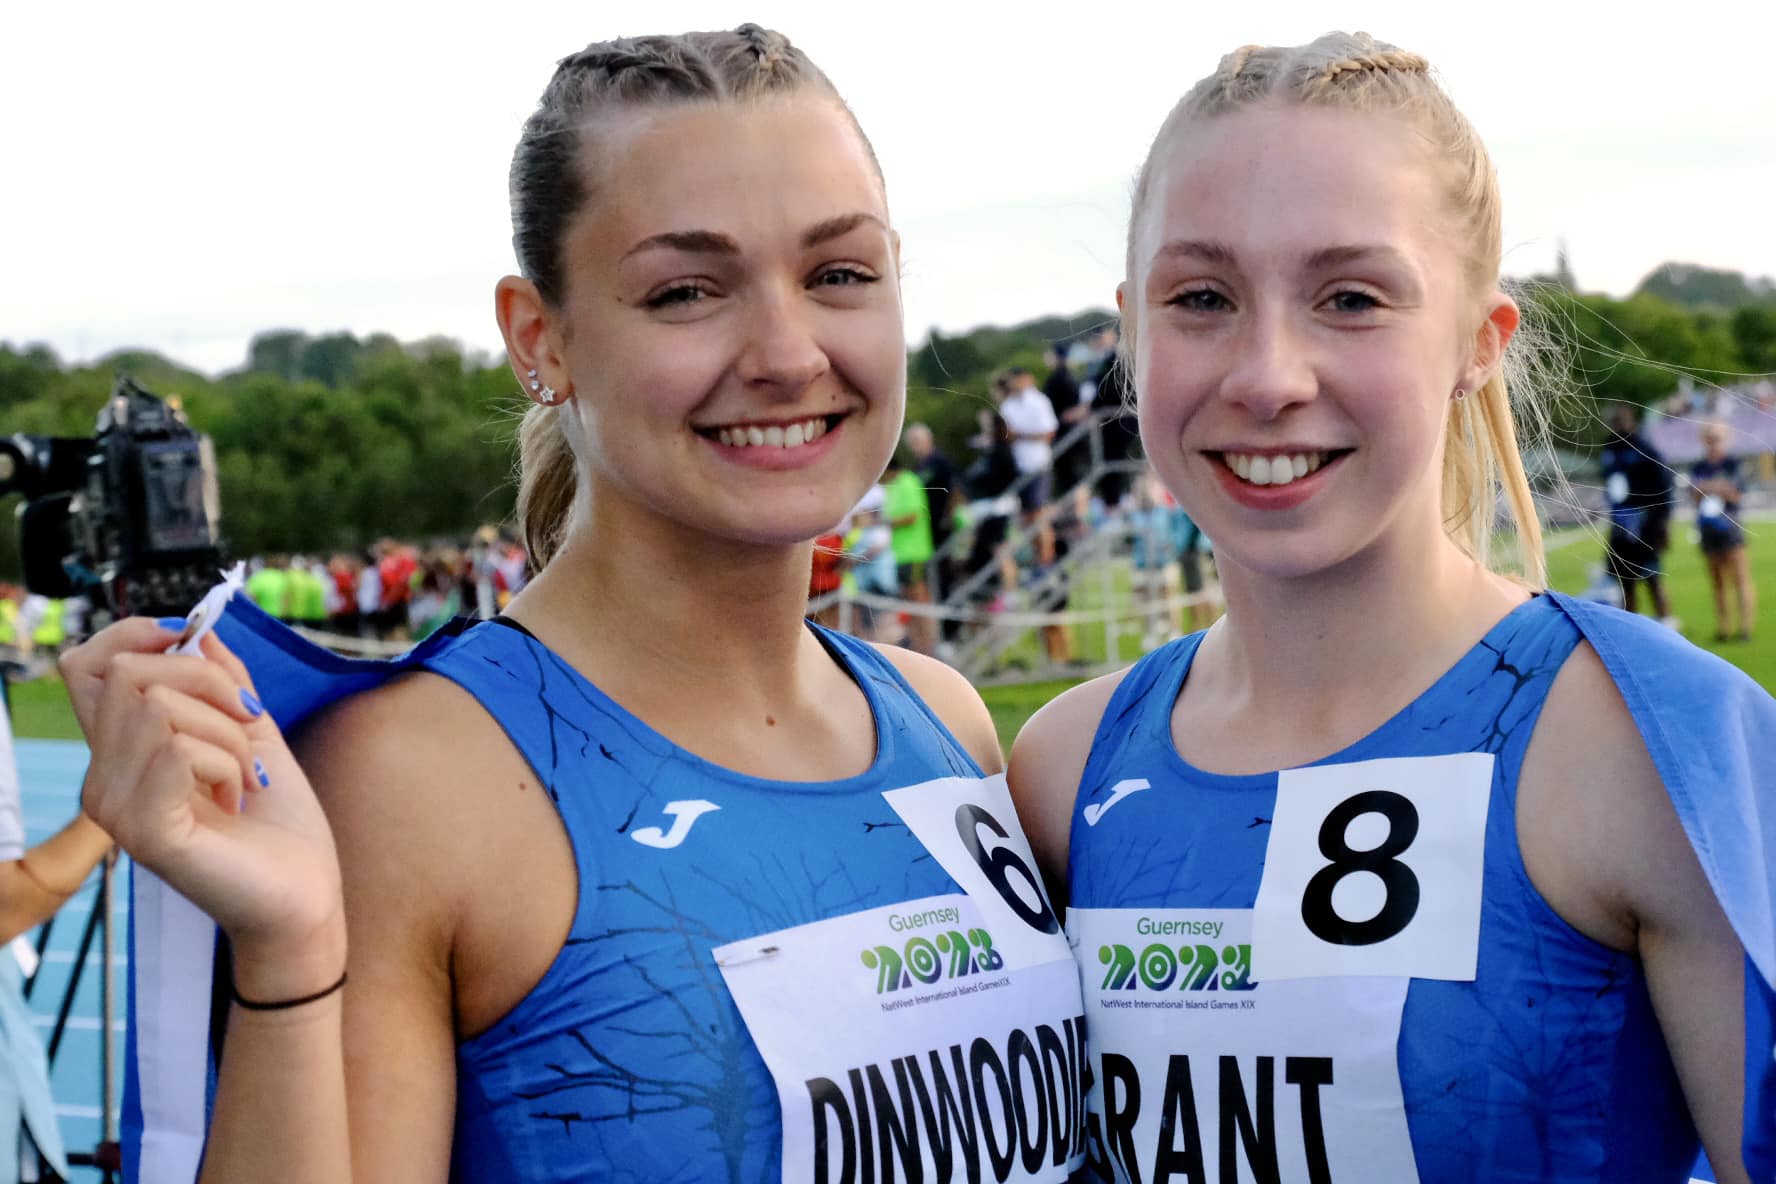 Two track athletes -  wearing blue tops, smiling at the camera.